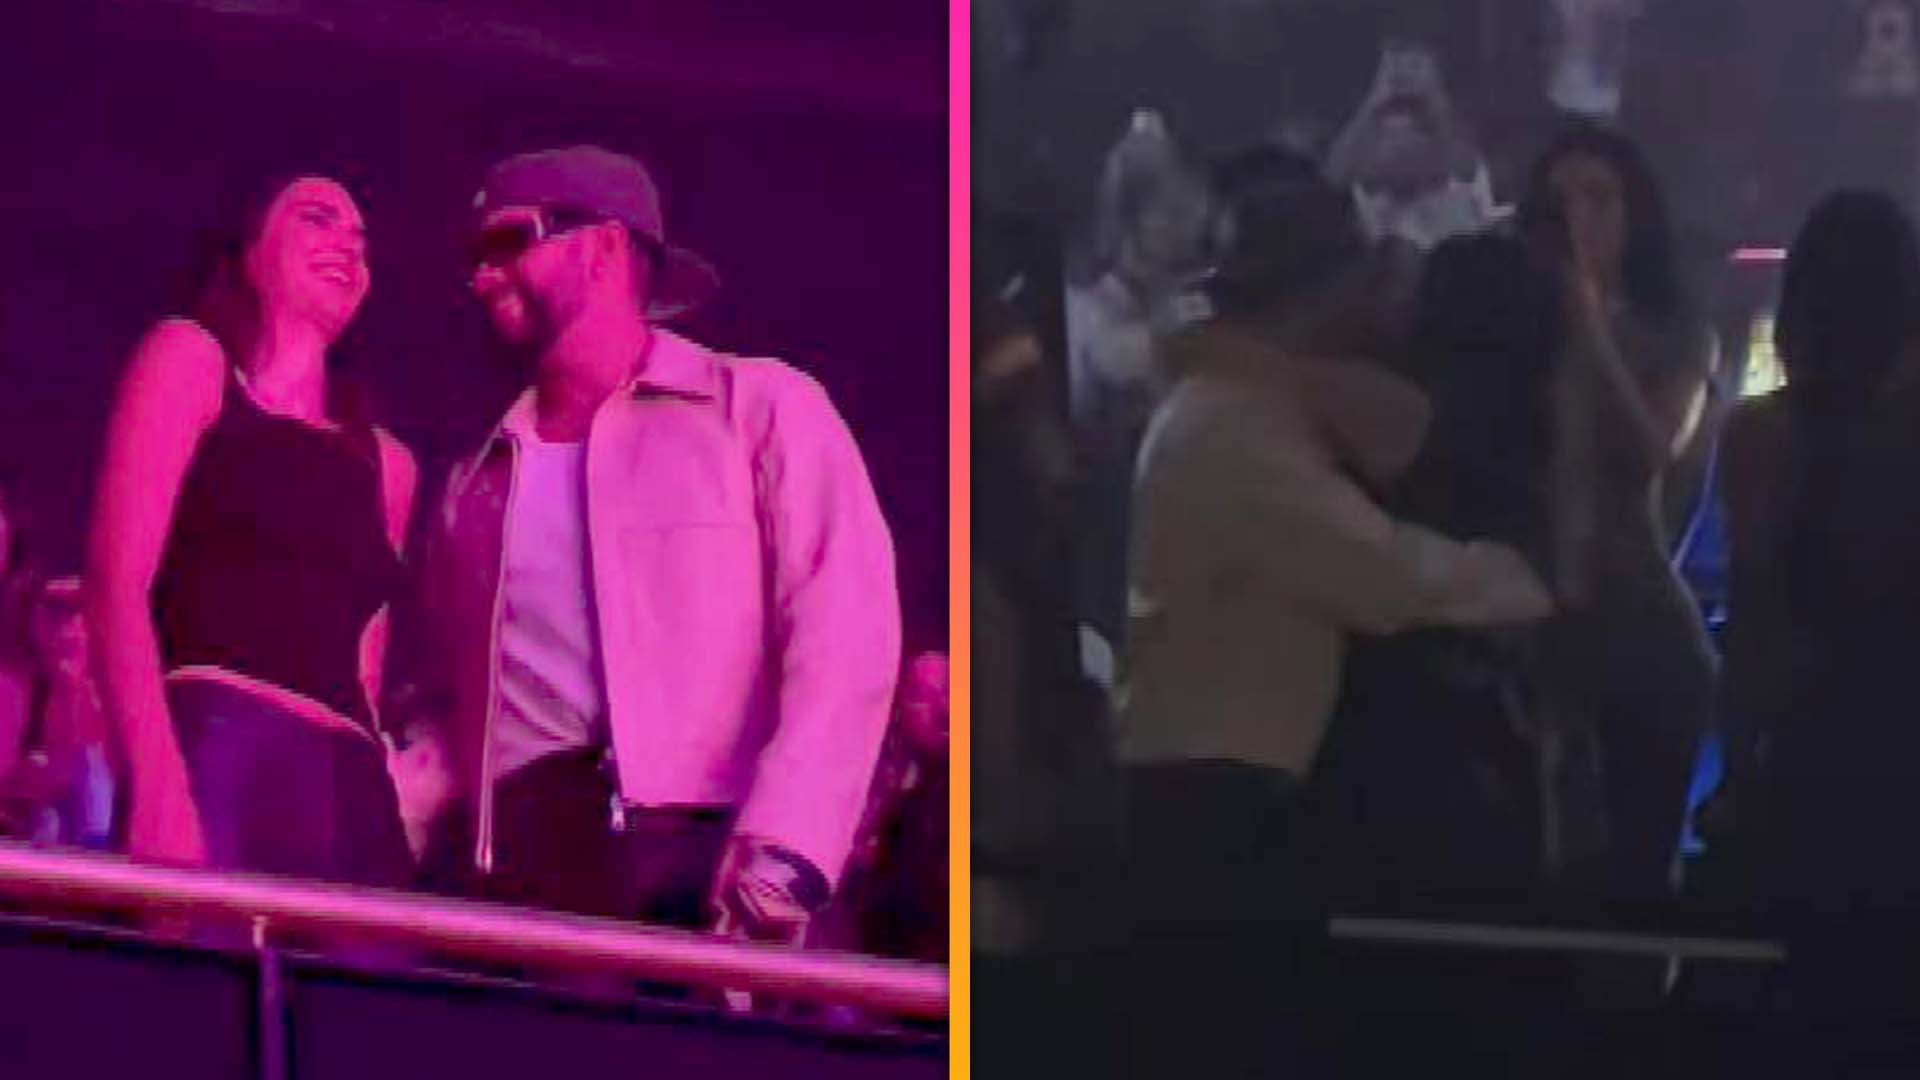 Is Bad Bunny's new song Un Preview all about Kendall Jenner? The Puerto  Rican star raps about a controversial kiss in the club … while the music  video is filled with equestrian